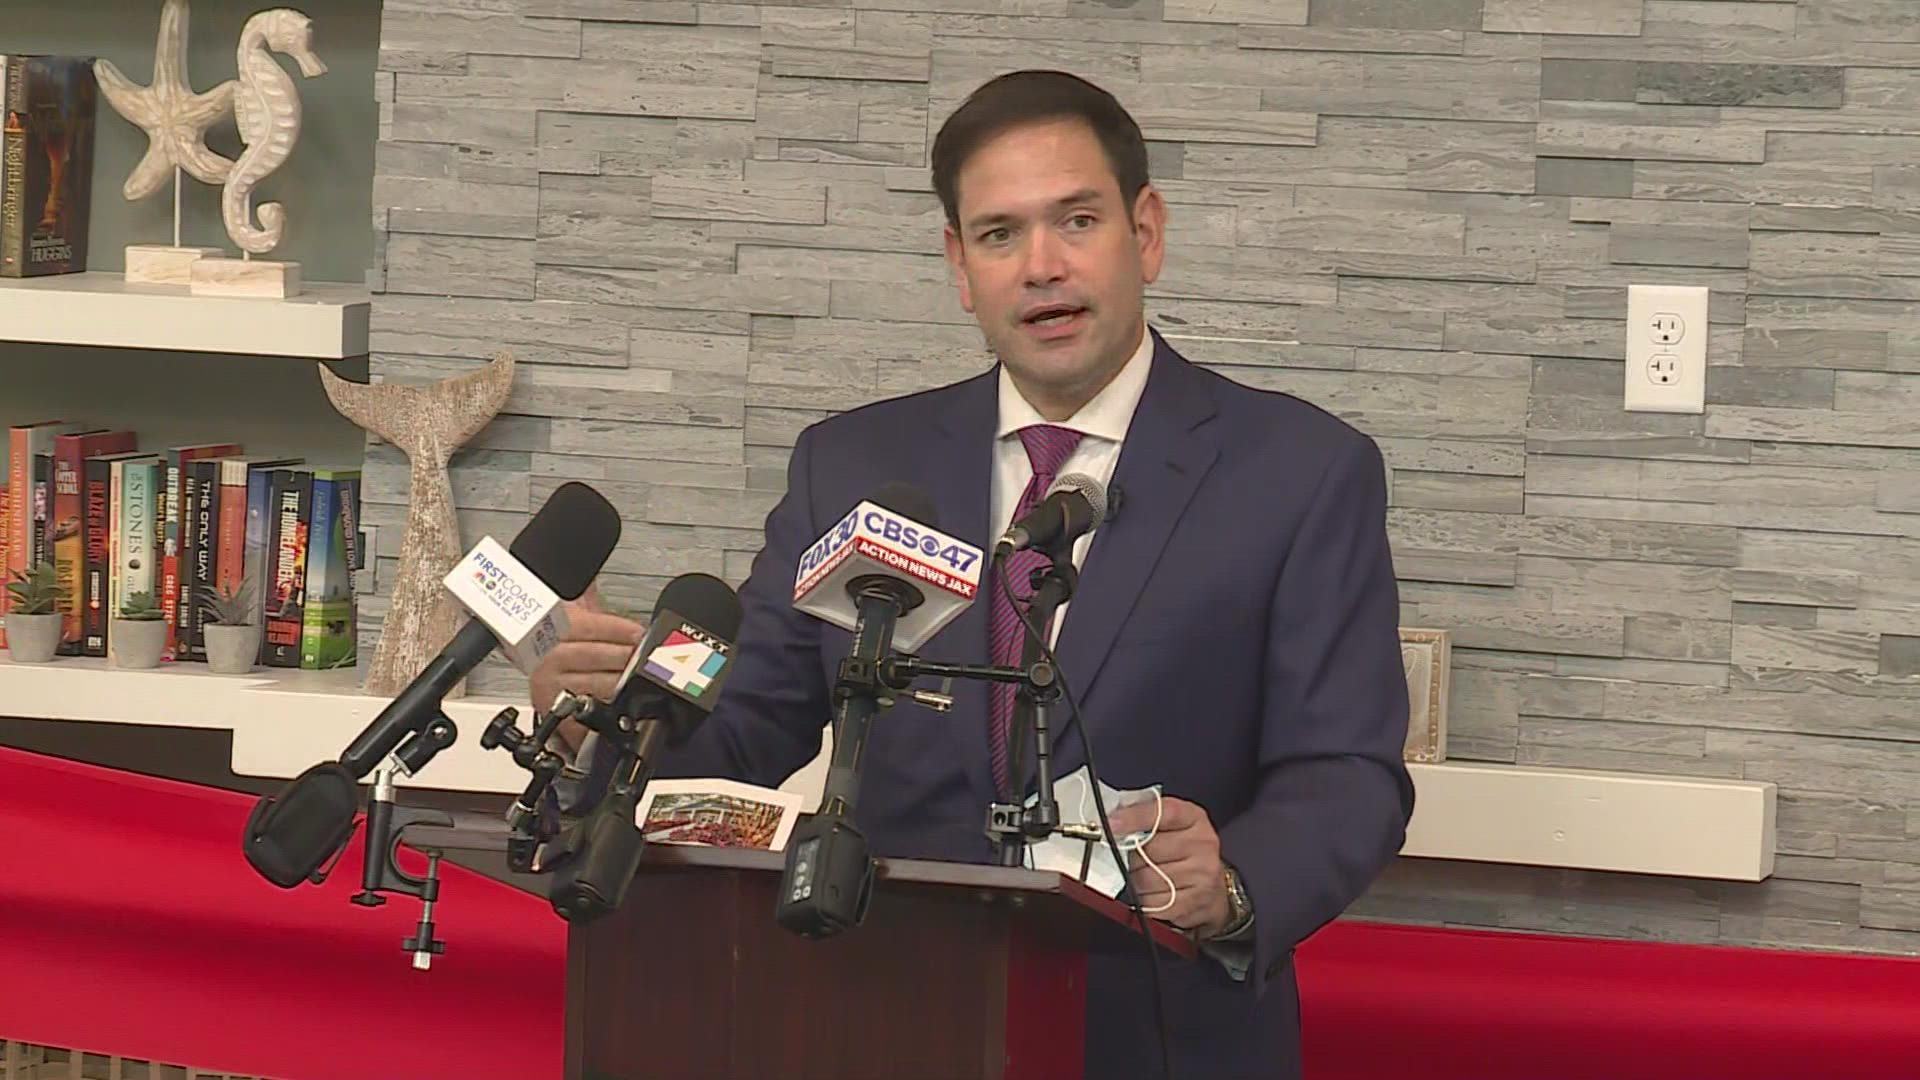 U.S. Senator Marco Rubio was in Jacksonville Tuesday for the grand opening of Valencia Way, formerly known as Eureka Gardens.